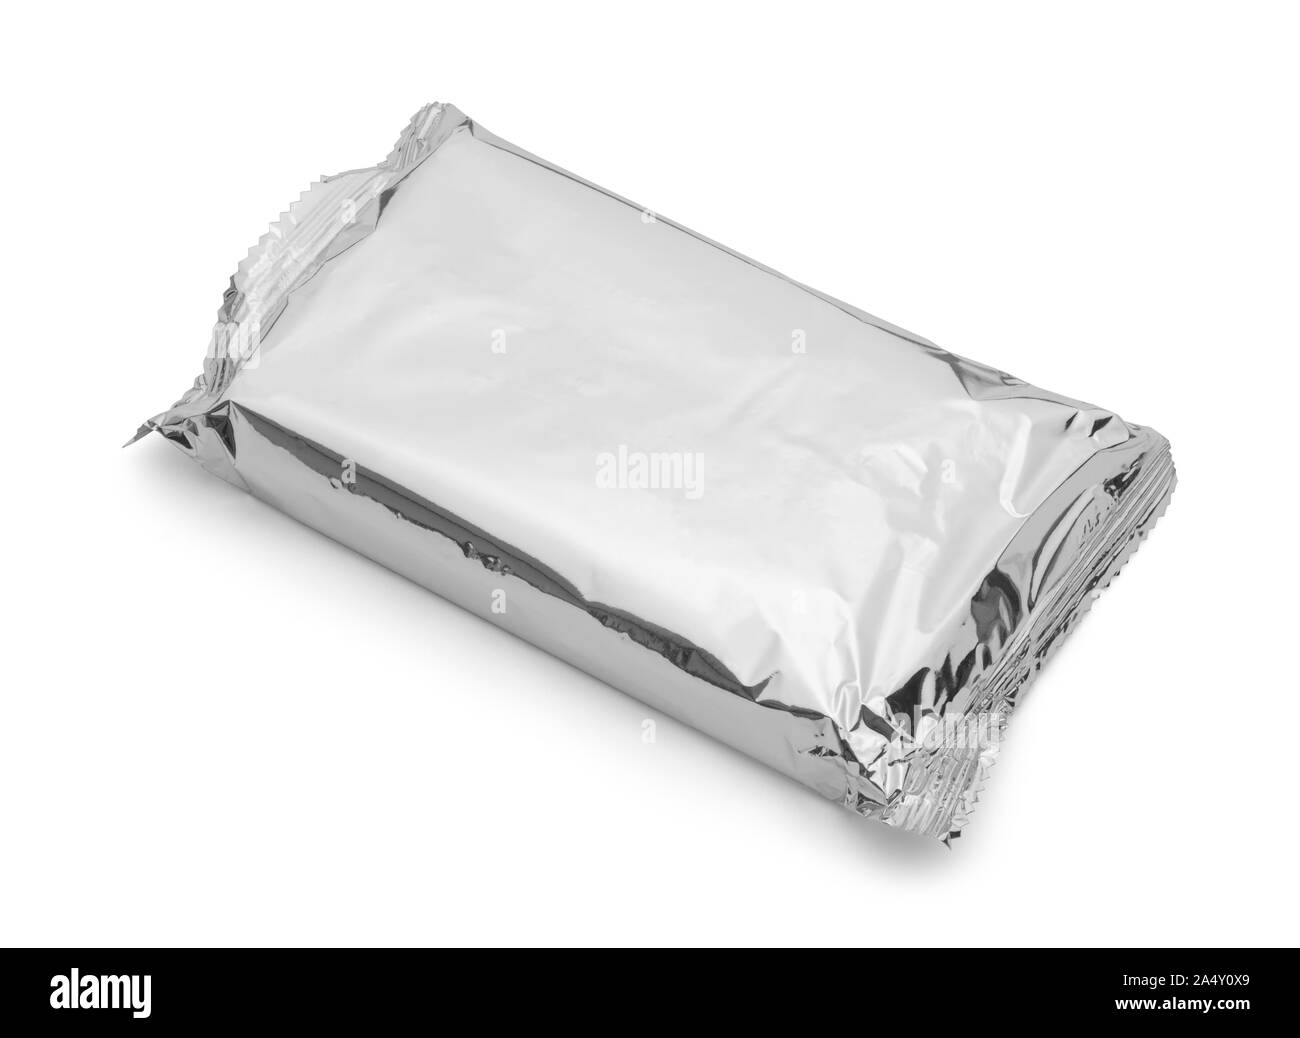 Toaster Pasteries in a Foil Package Isolated on White. Stock Photo